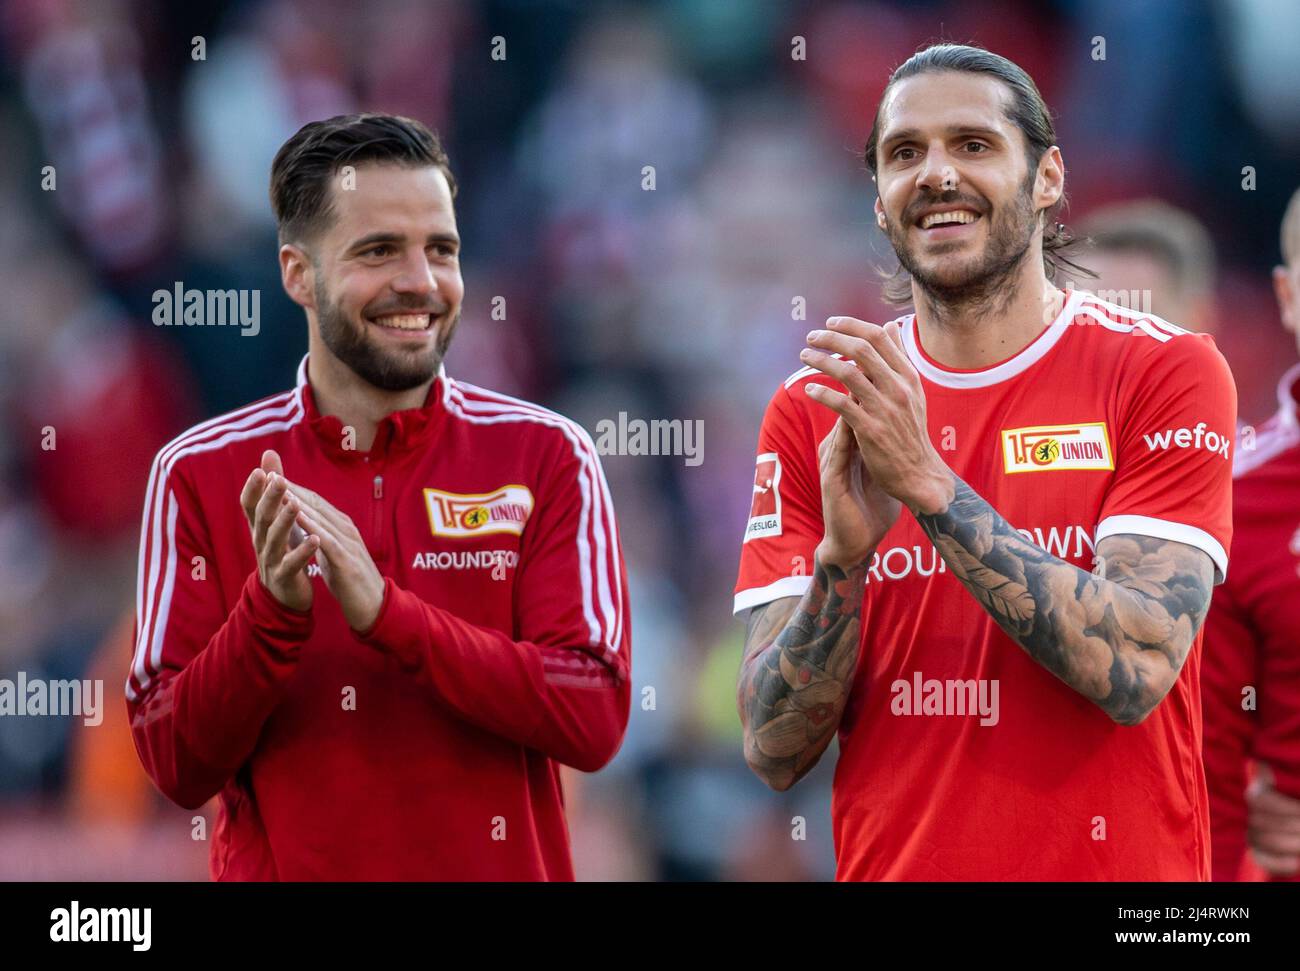 Berlin, Germany. 17th Apr, 2022. Soccer: Bundesliga, 1. FC Union Berlin - Eintracht Frankfurt, Matchday 30, An der Alten Försterei. Berlin's Niko Gießelmann (l) and Christopher Trimmel laugh and thank the crowd after the win. Credit: Andreas Gora/dpa - IMPORTANT NOTE: In accordance with the requirements of the DFL Deutsche Fußball Liga and the DFB Deutscher Fußball-Bund, it is prohibited to use or have used photographs taken in the stadium and/or of the match in the form of sequence pictures and/or video-like photo series./dpa/Alamy Live News Stock Photo